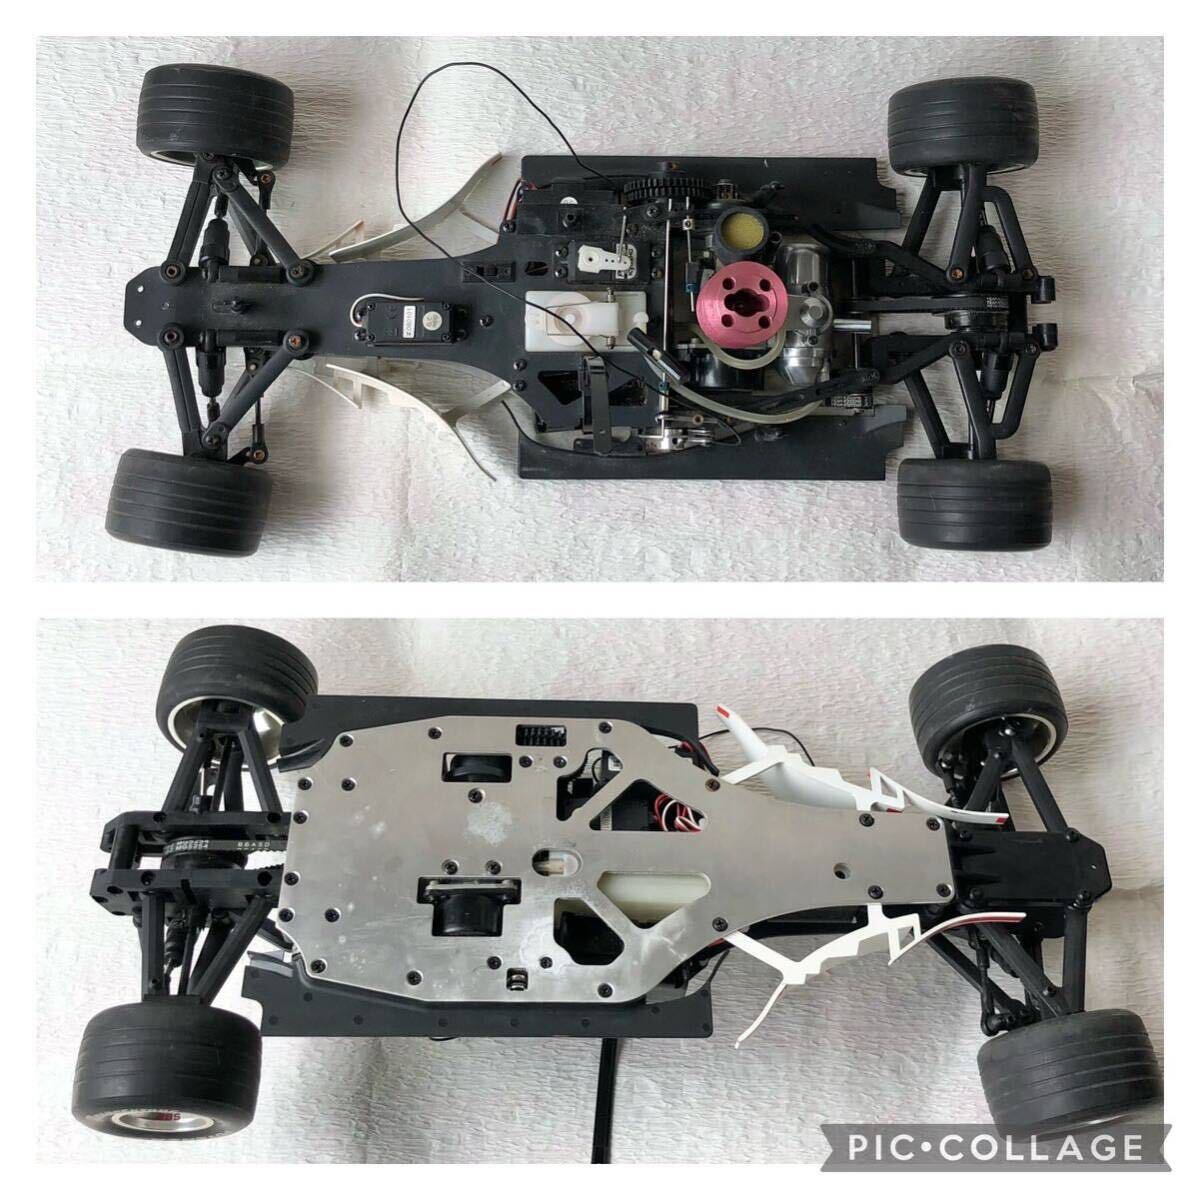  radio controlled car /KYOSHO / Kyosho / engine car /F1/ part removing / operation not yet verification therefore, complete Junk exhibition. 